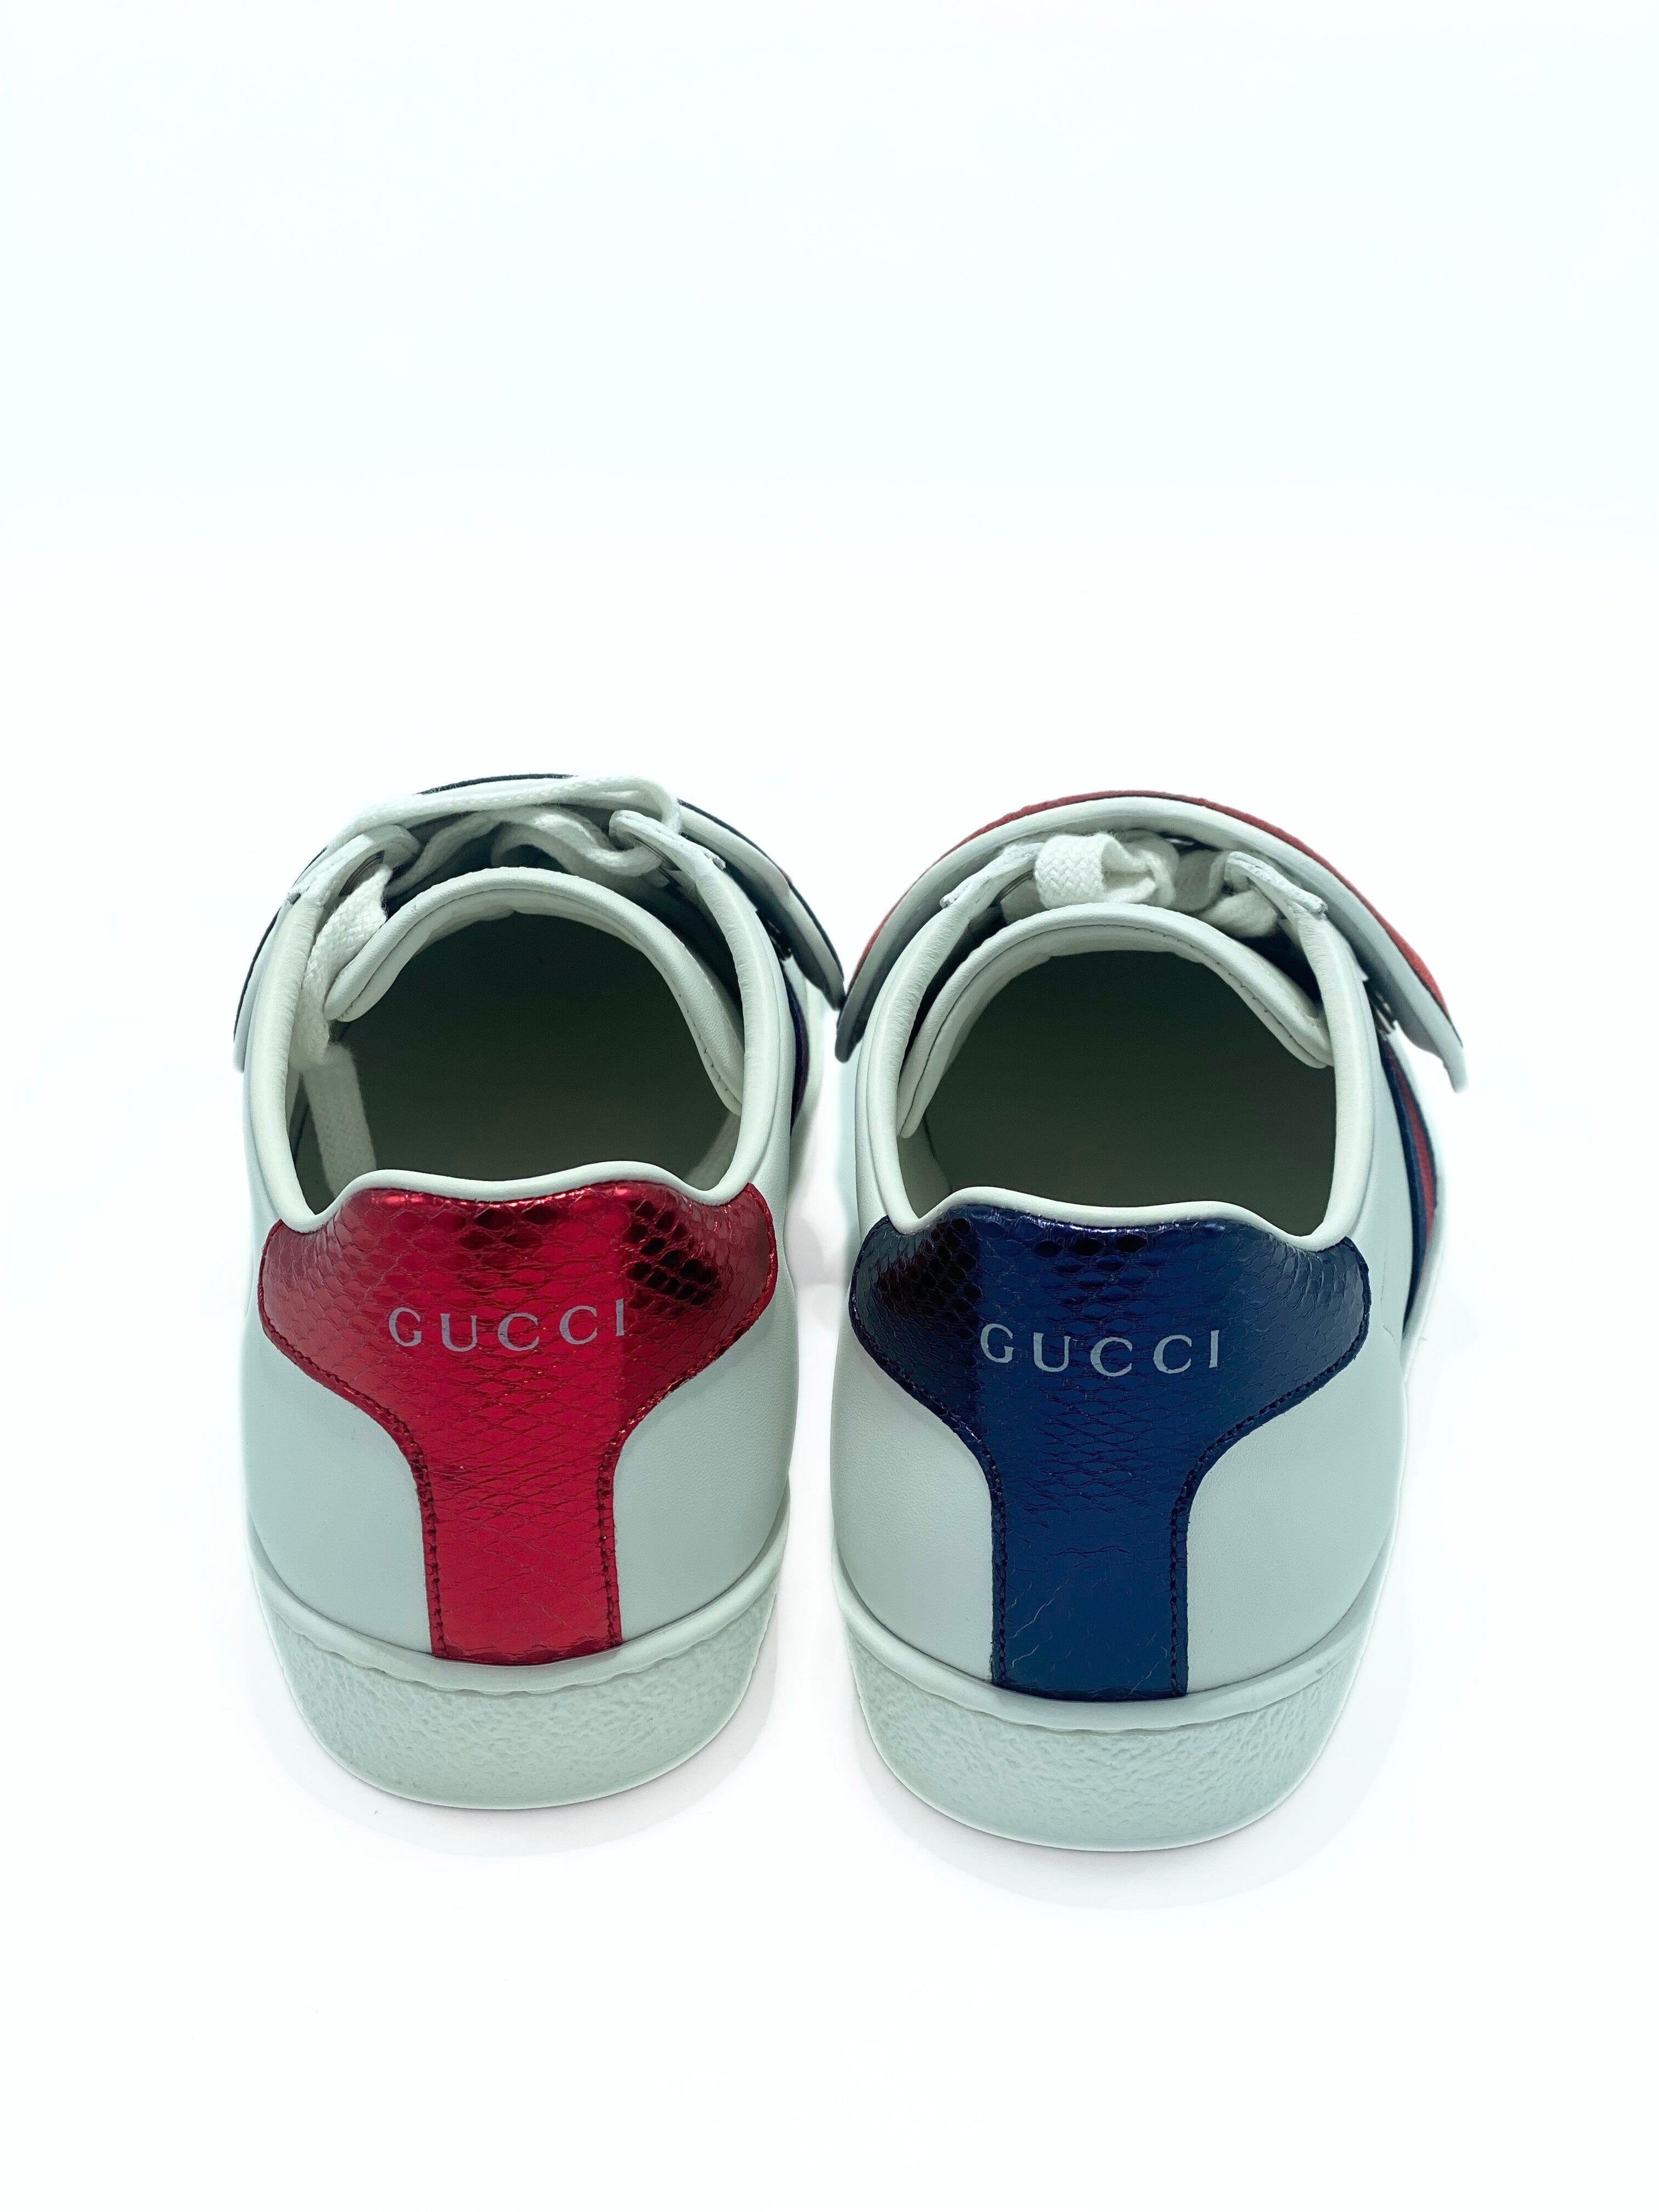 Champion Gucci Ace Blind for Love